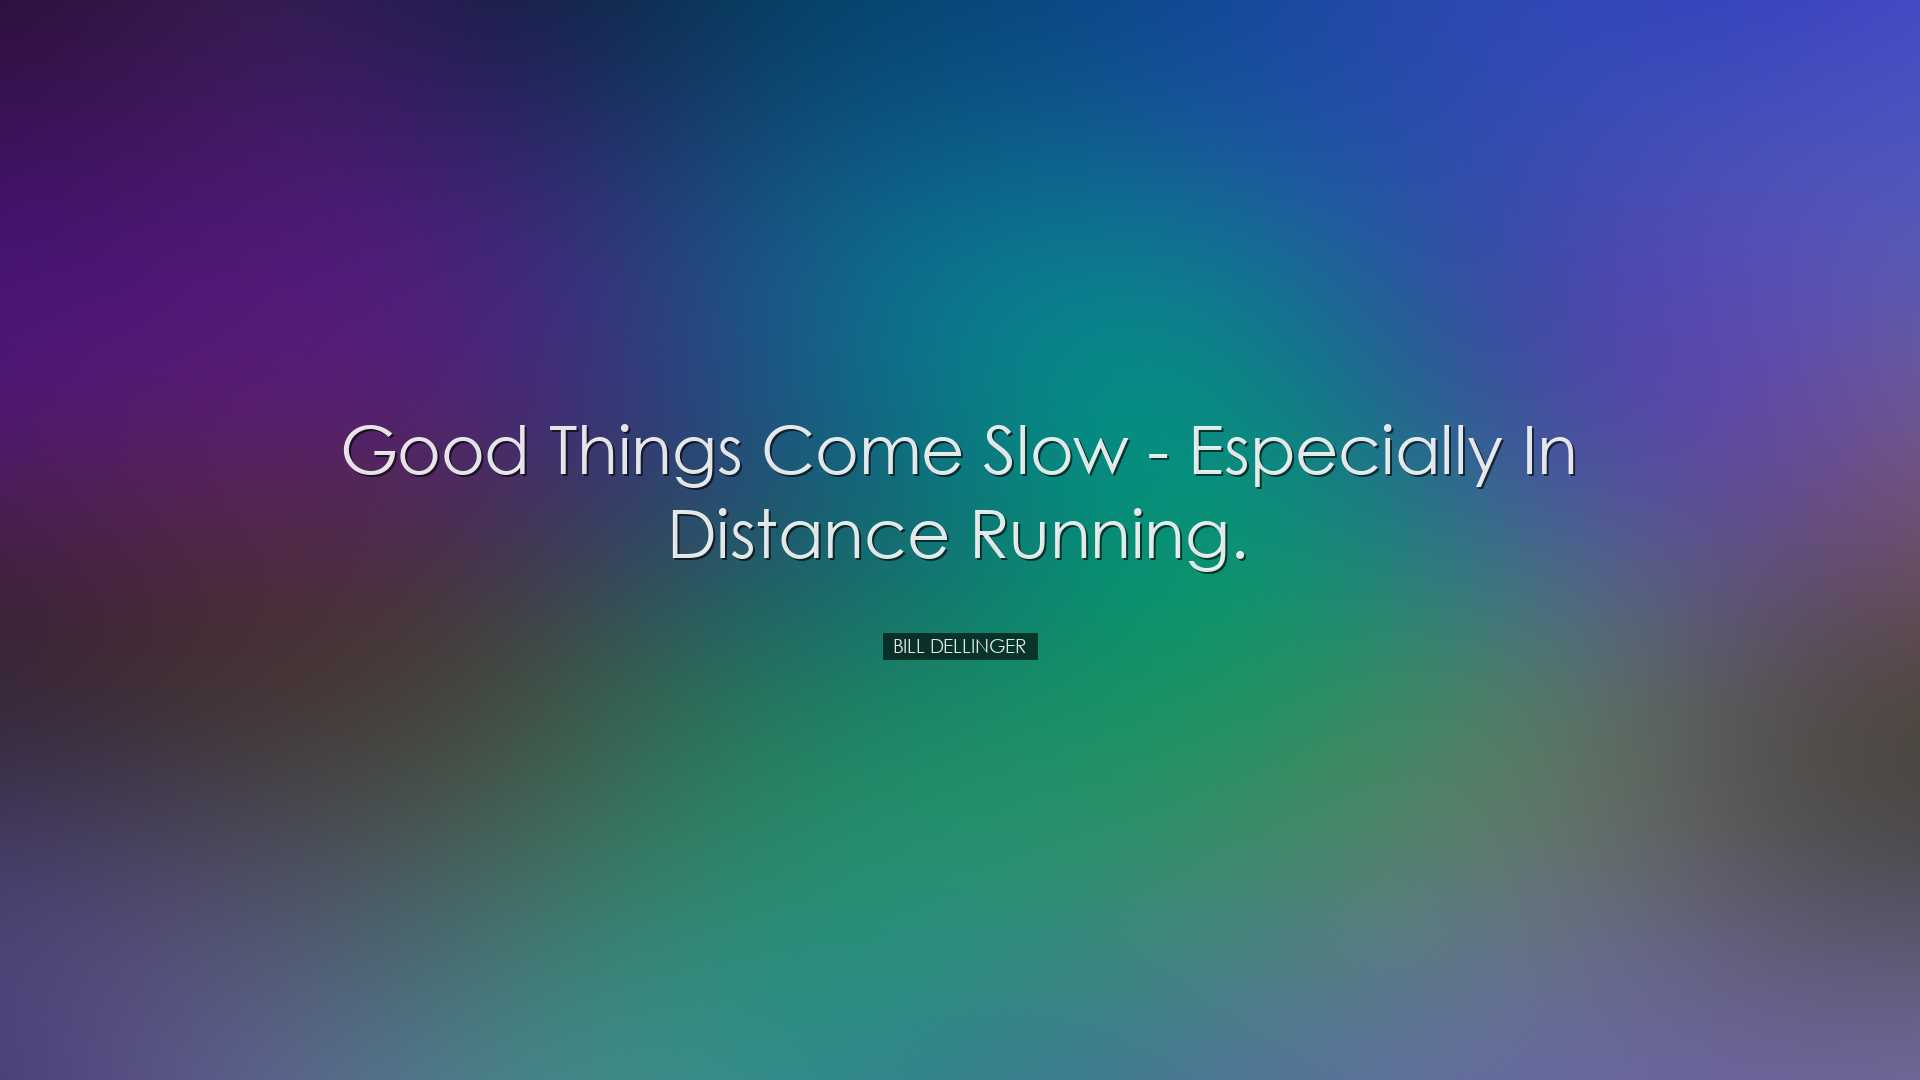 Good things come slow - especially in distance running. - Bill Del